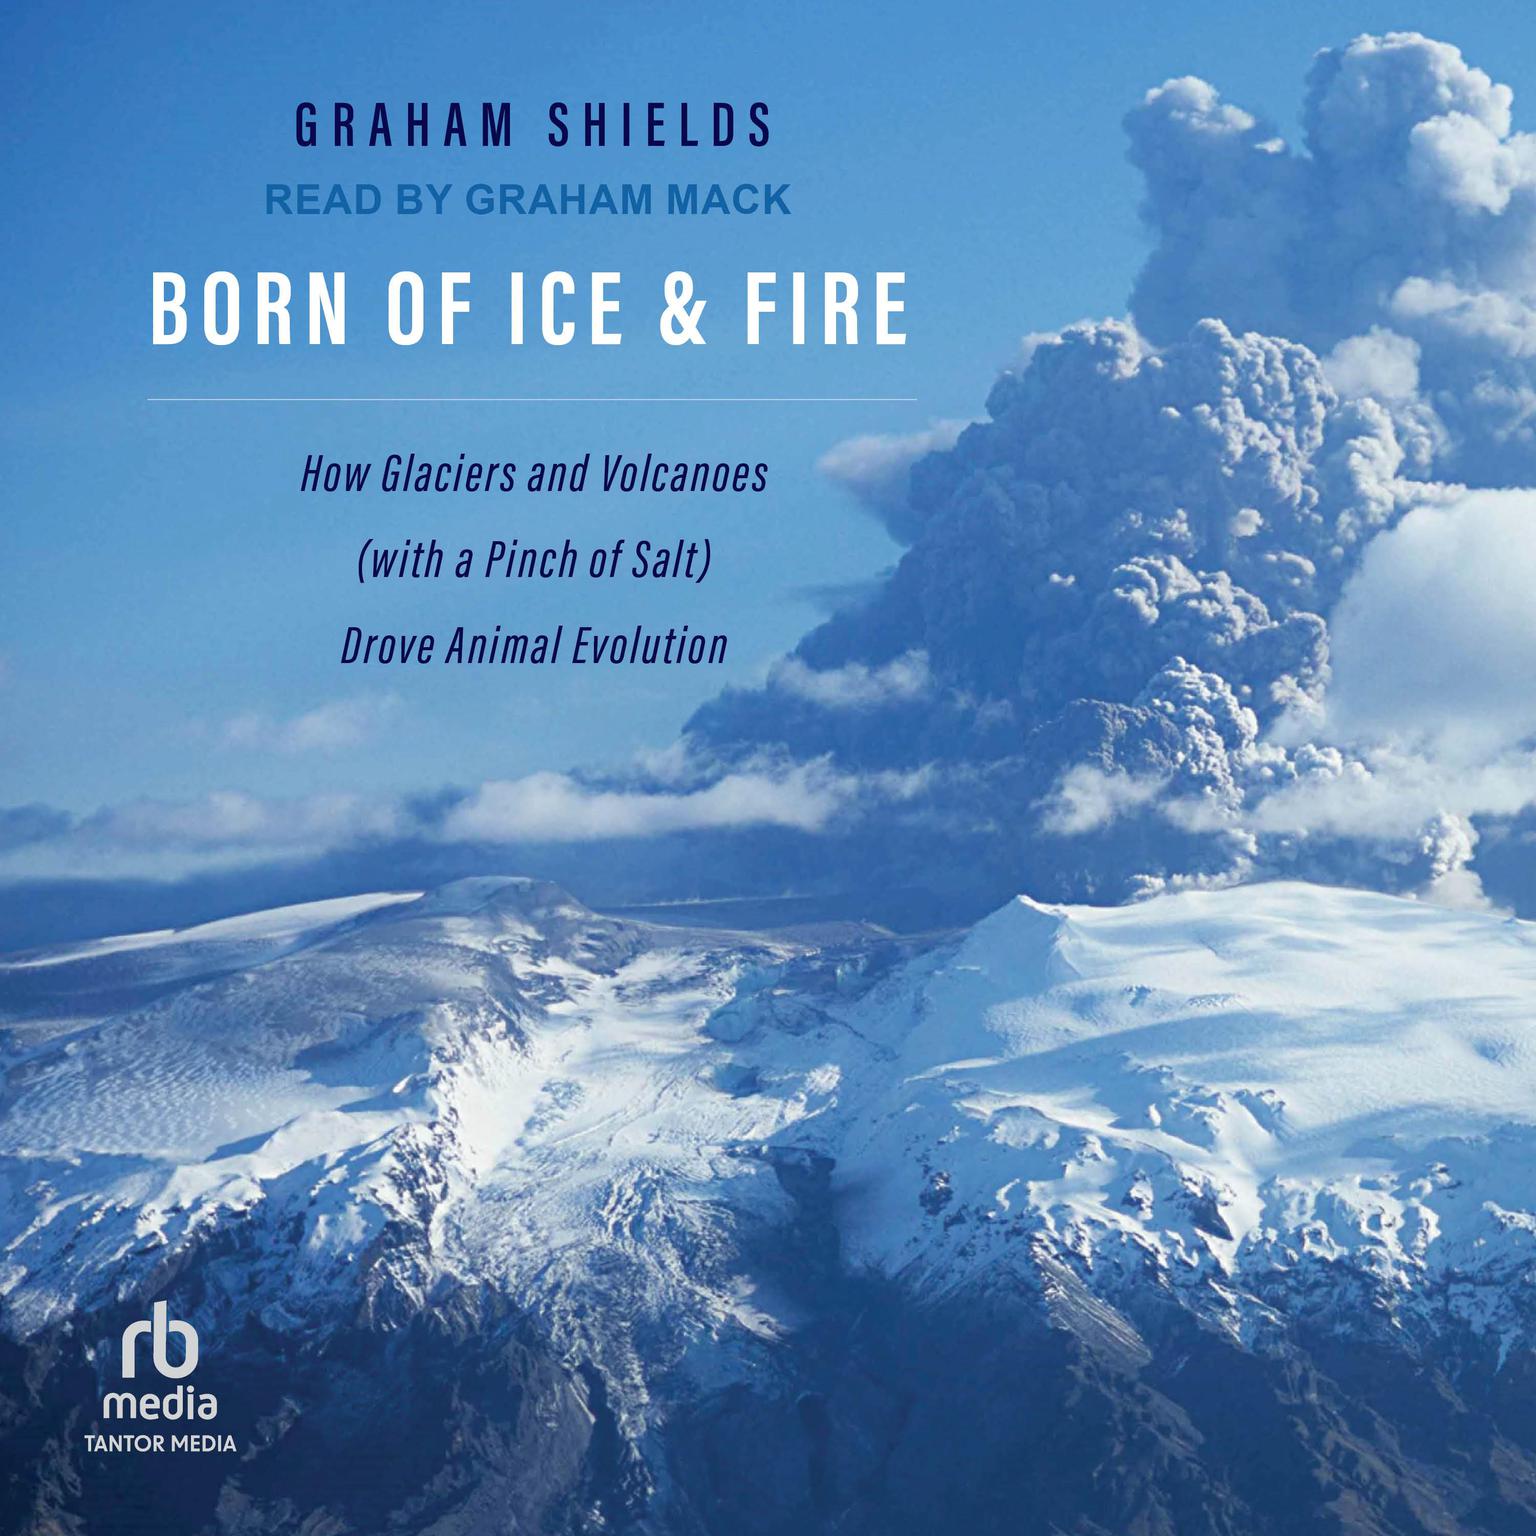 Born of Ice and Fire: How Glaciers and Volcanoes (with a Pinch of Salt) Drove Animal Evolution Audiobook, by Graham Shields